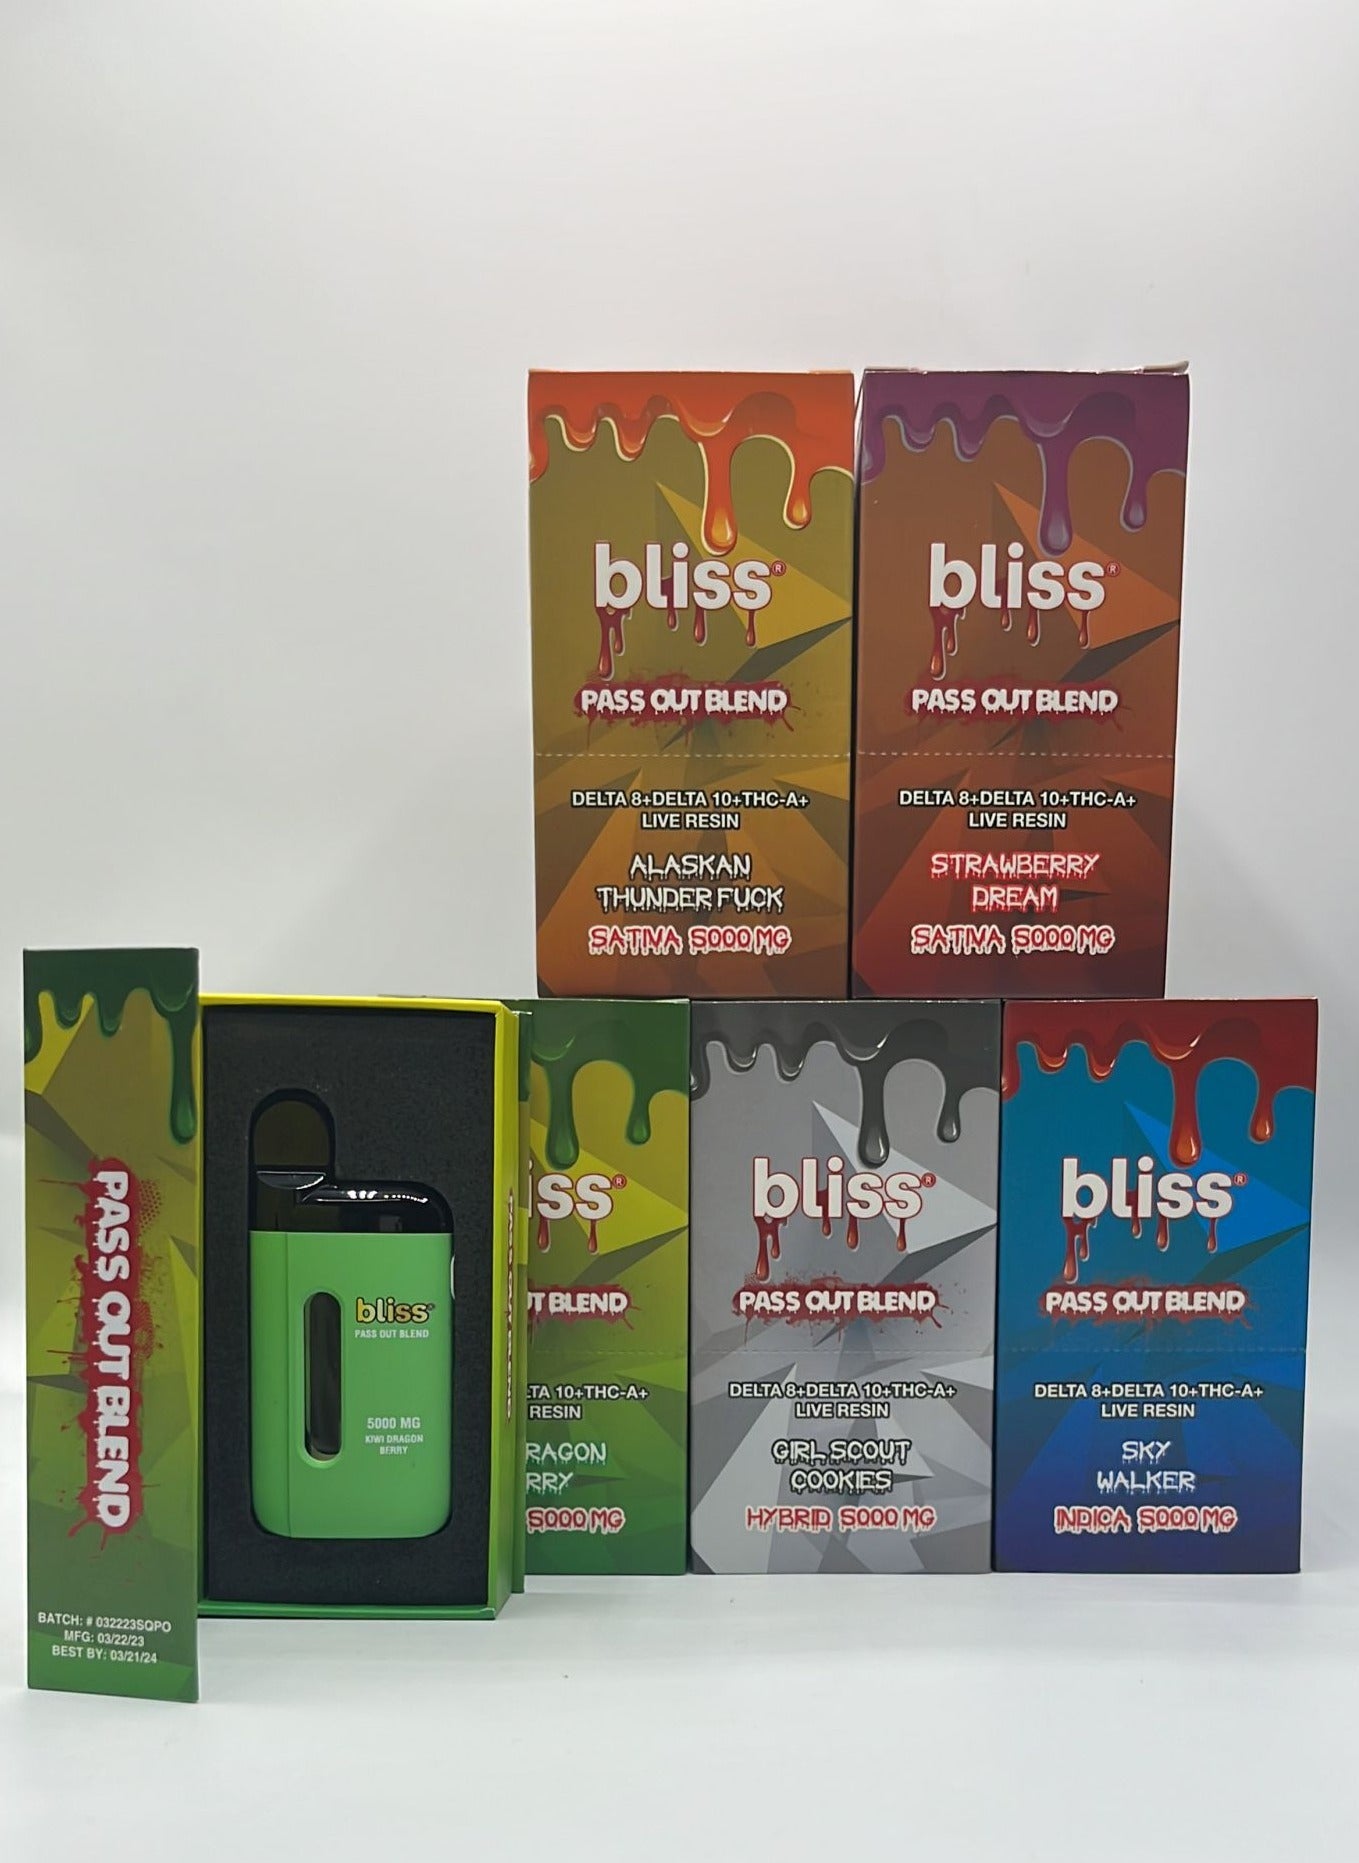 Bliss Pass Out Blend Delta 8 + Delta 10 + THC-A Live Resin 5000mg | Pack Of 05 - SquaredistributionBLISS